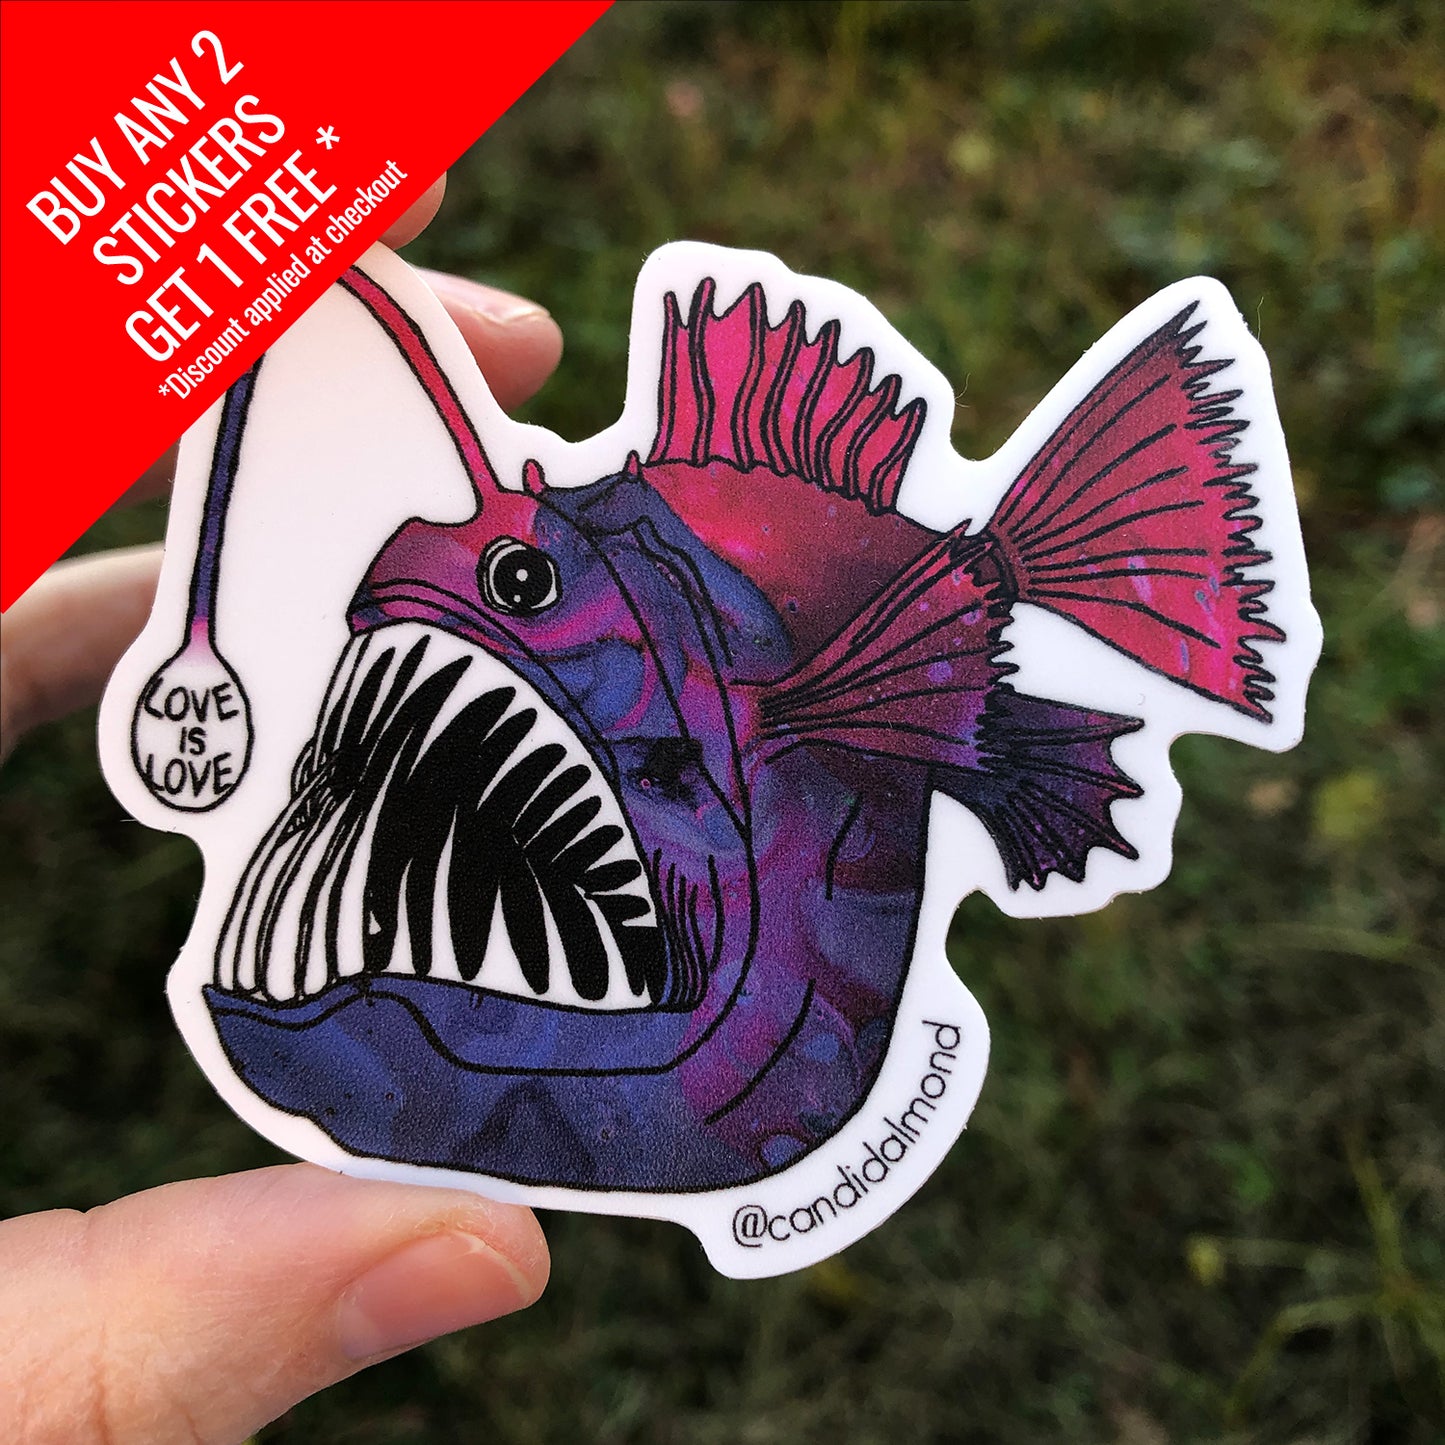 Angler Fish 'Love Is Love' Decal Sticker